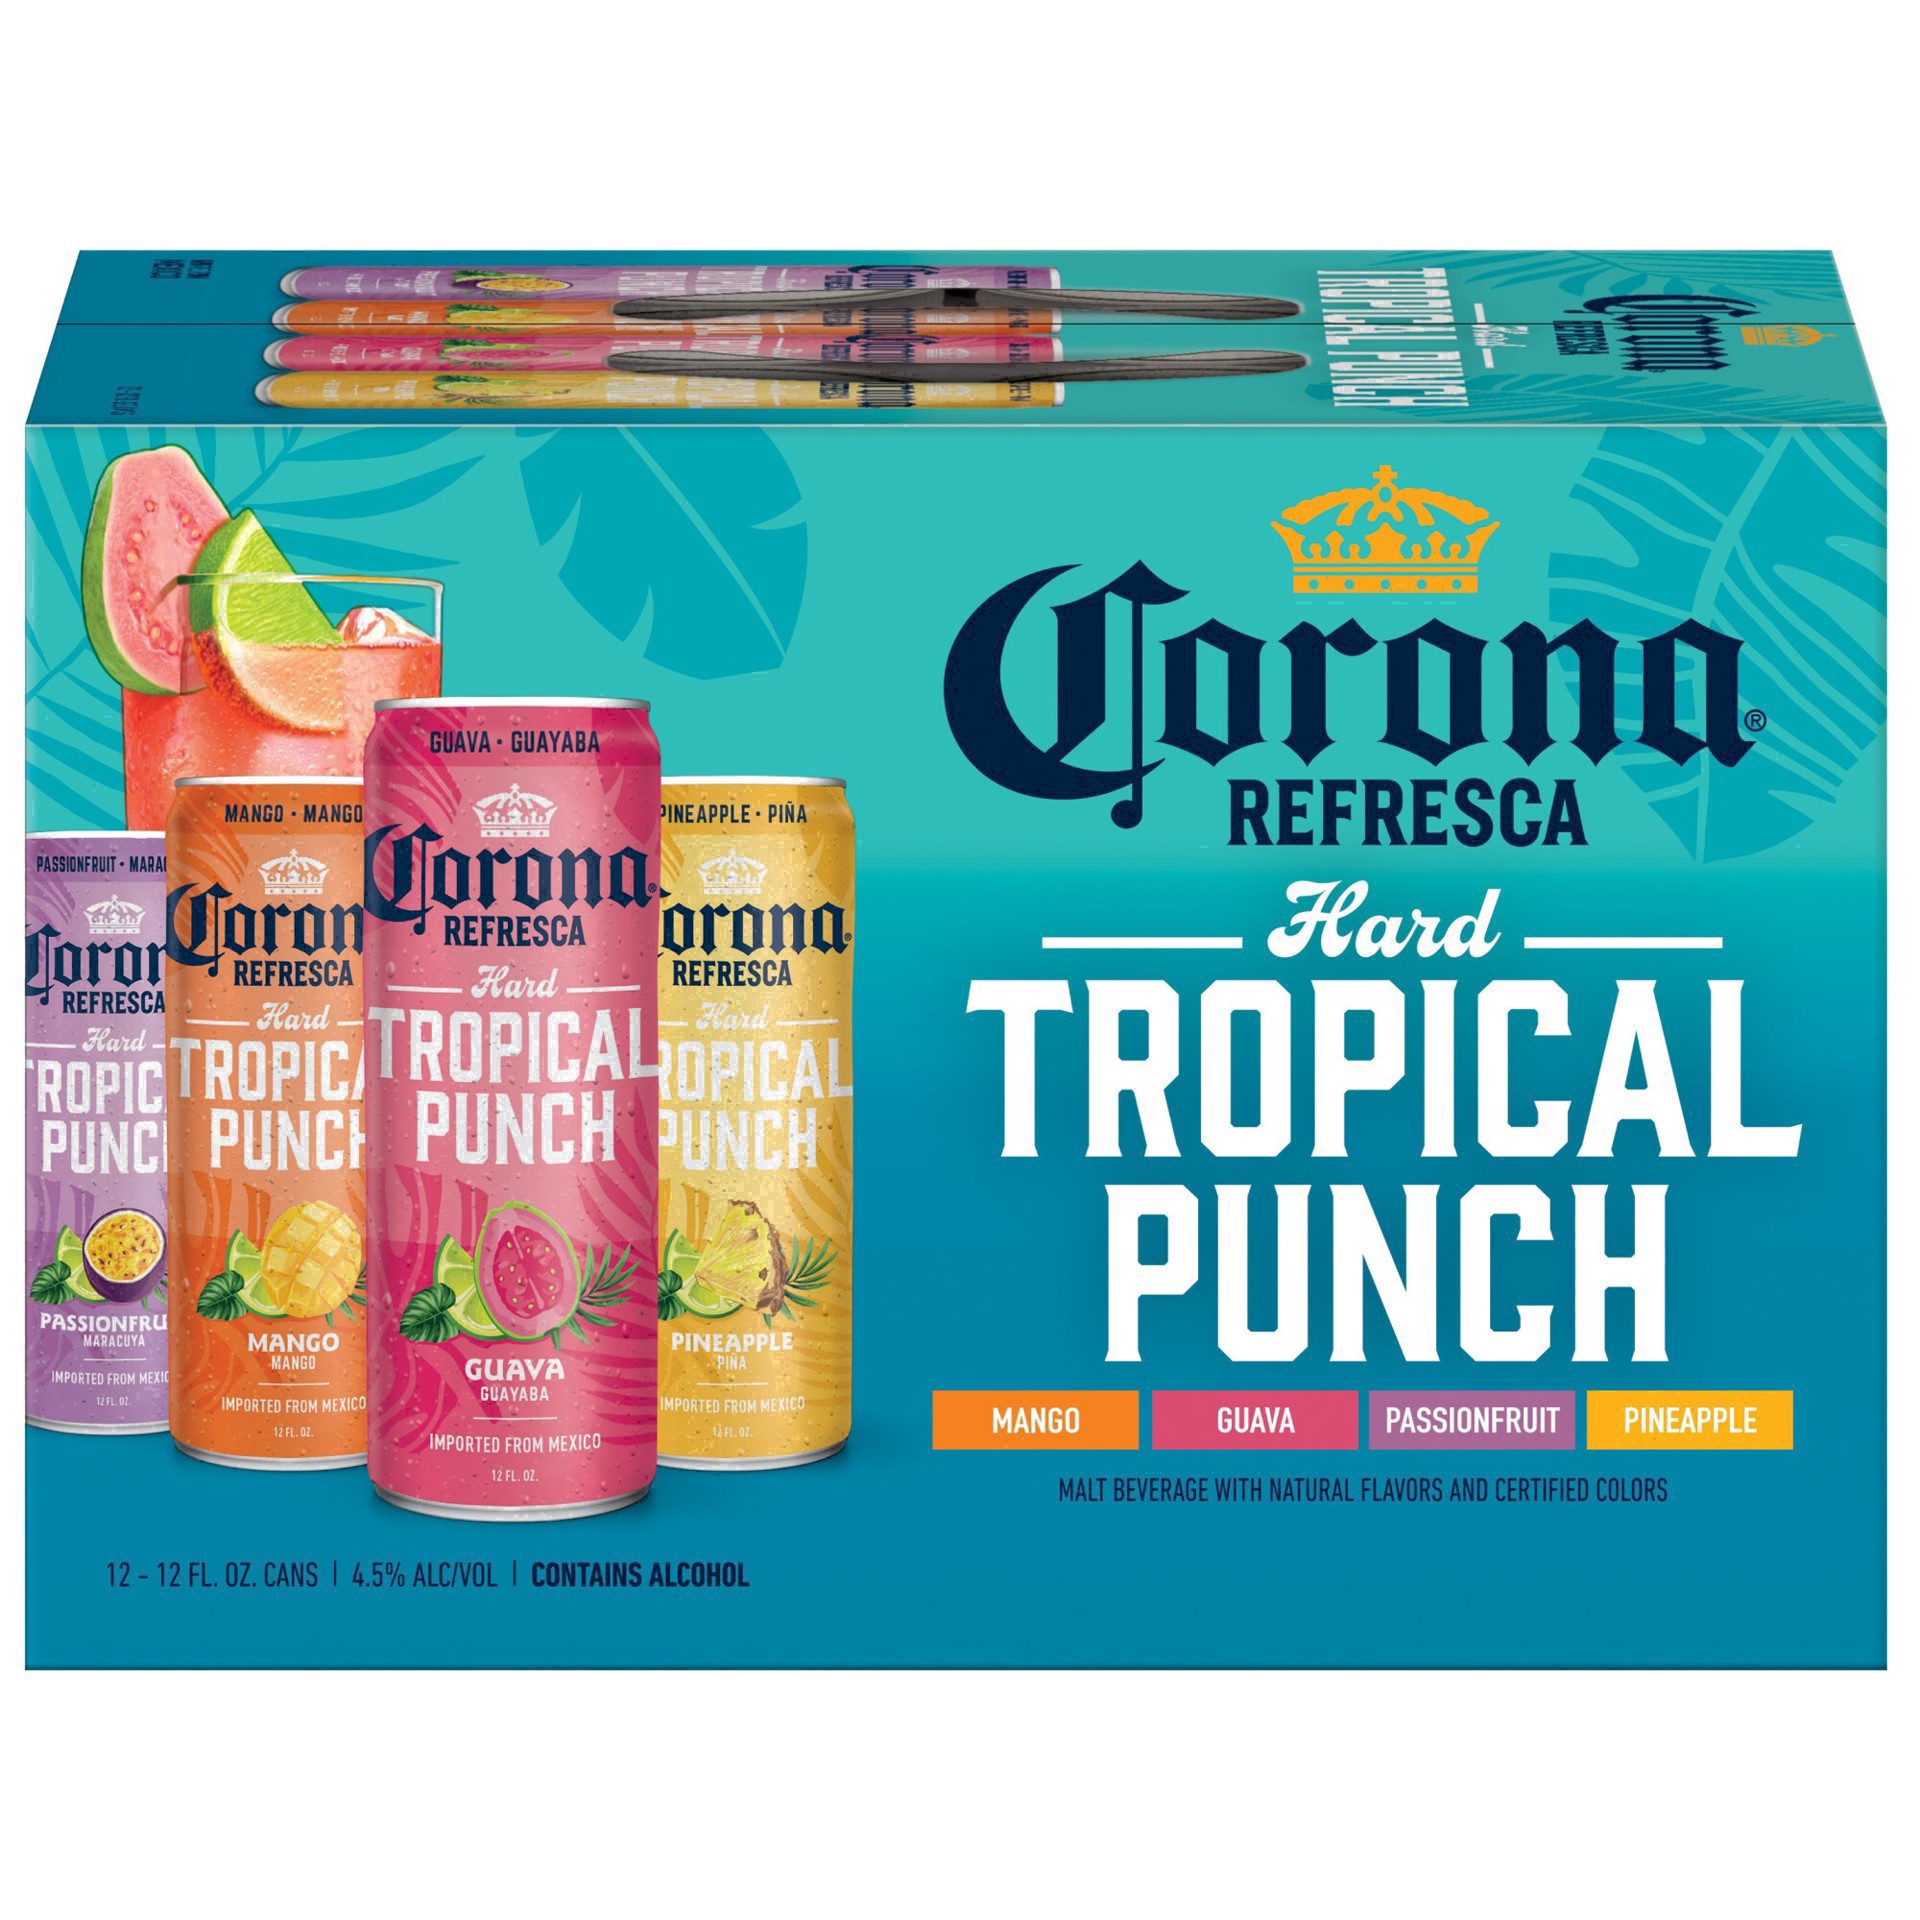 slide 99 of 113, Corona Refresca Hard Tropical Punch Variety Pack Cans, 144 fl oz